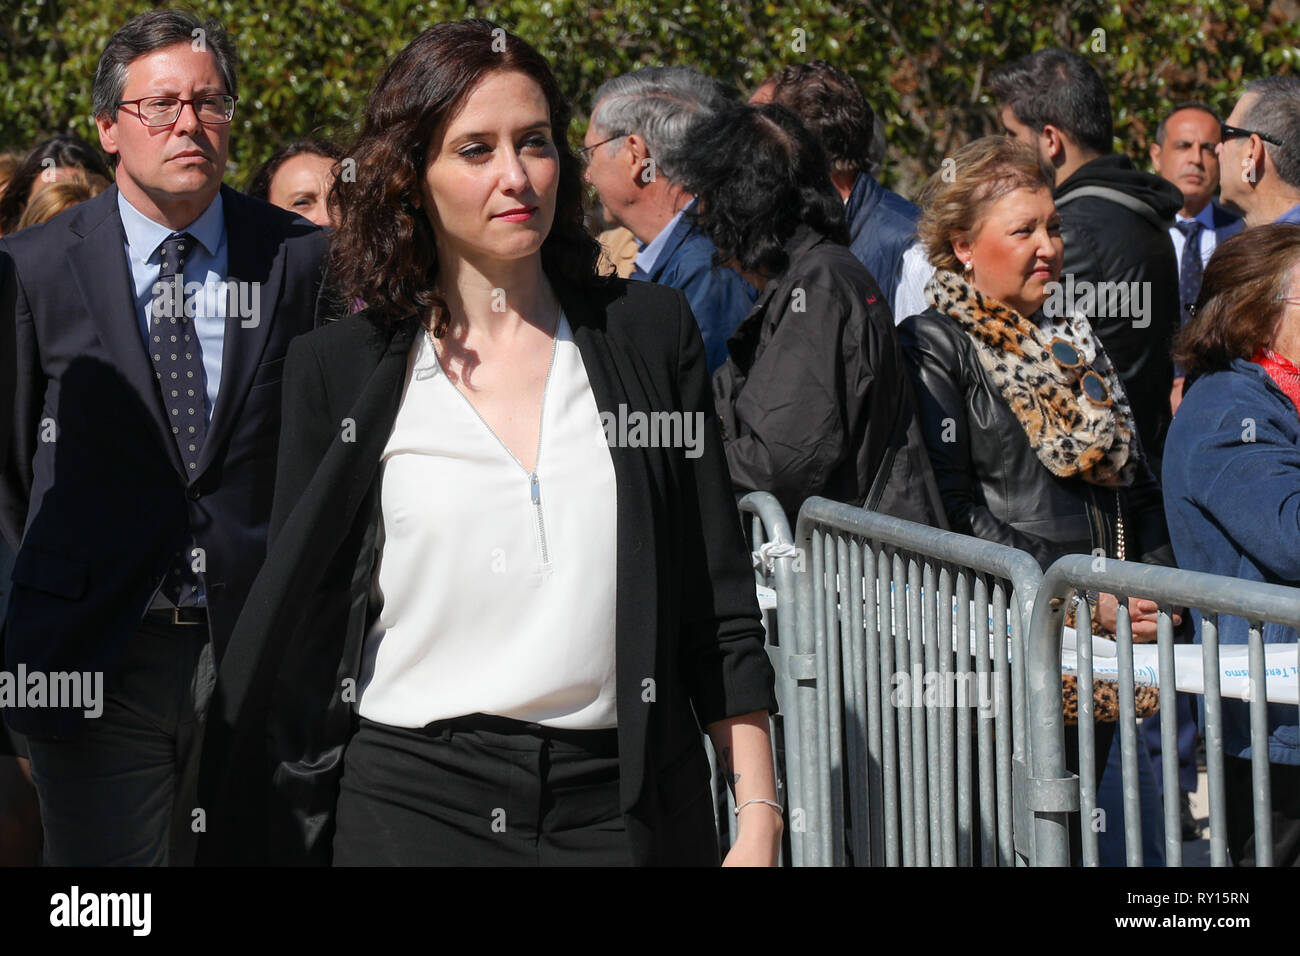 Madrid, Spain. 11th Mar 2019. Isabel Diaz-Ayuso seen attending the event of the The Association of Victims of Terrorism (AVT) in the El Retiro Park in memory of the victims of the attacks of March 11, 2004. Credit: Jesús Hellin/Alamy Live News Stock Photo